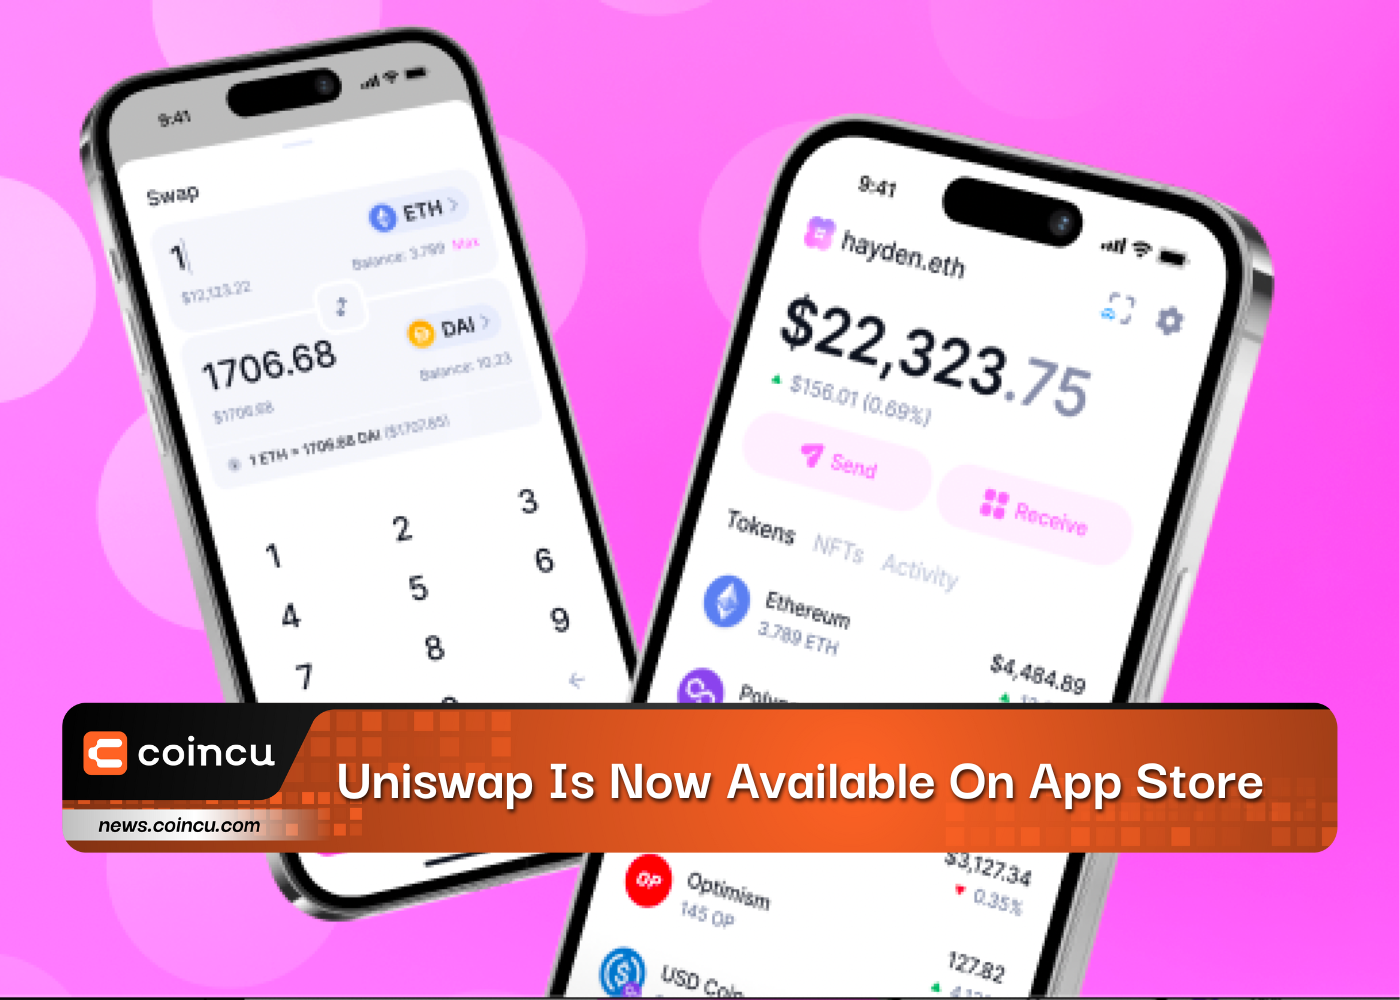 Uniswap Is Now Available On App Store